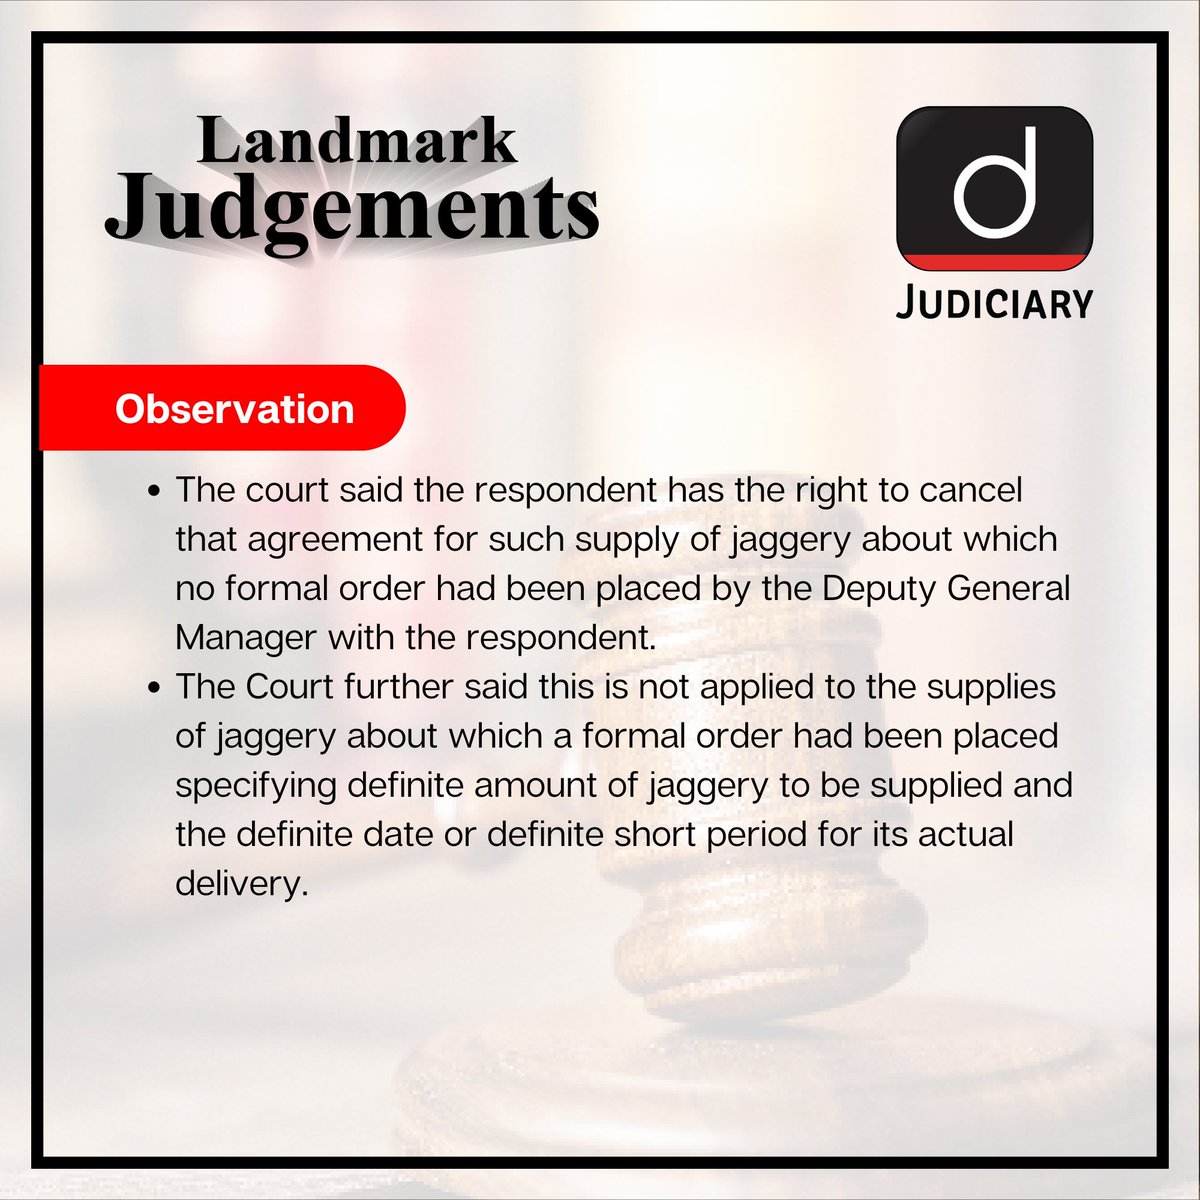 Get inspired by the transformative power of landmark judgments

Check our website: drishti.xyz/website-Judici…

#LandmarkJudgement #LegalServices #Appeal #Judgements #Judges #IndianLaw #IndianLawNews #Constitution #India #Lawyer #Judiciary #DrishtiJudiciary